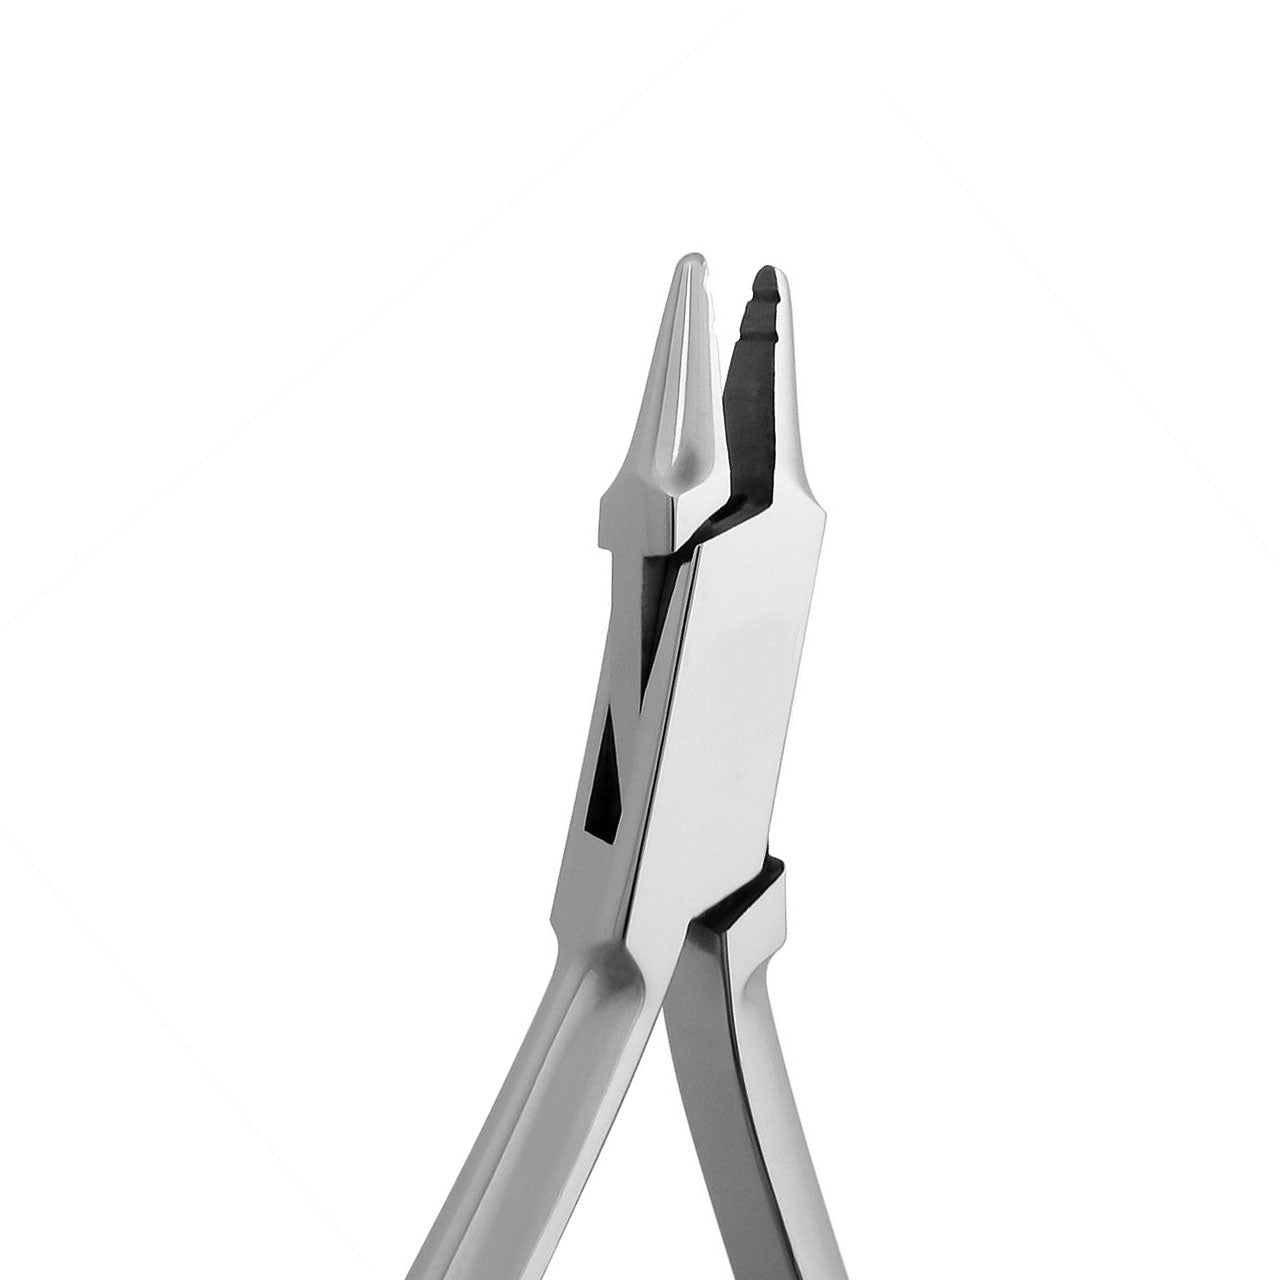 Stainless Steel Wire Bending Pliers